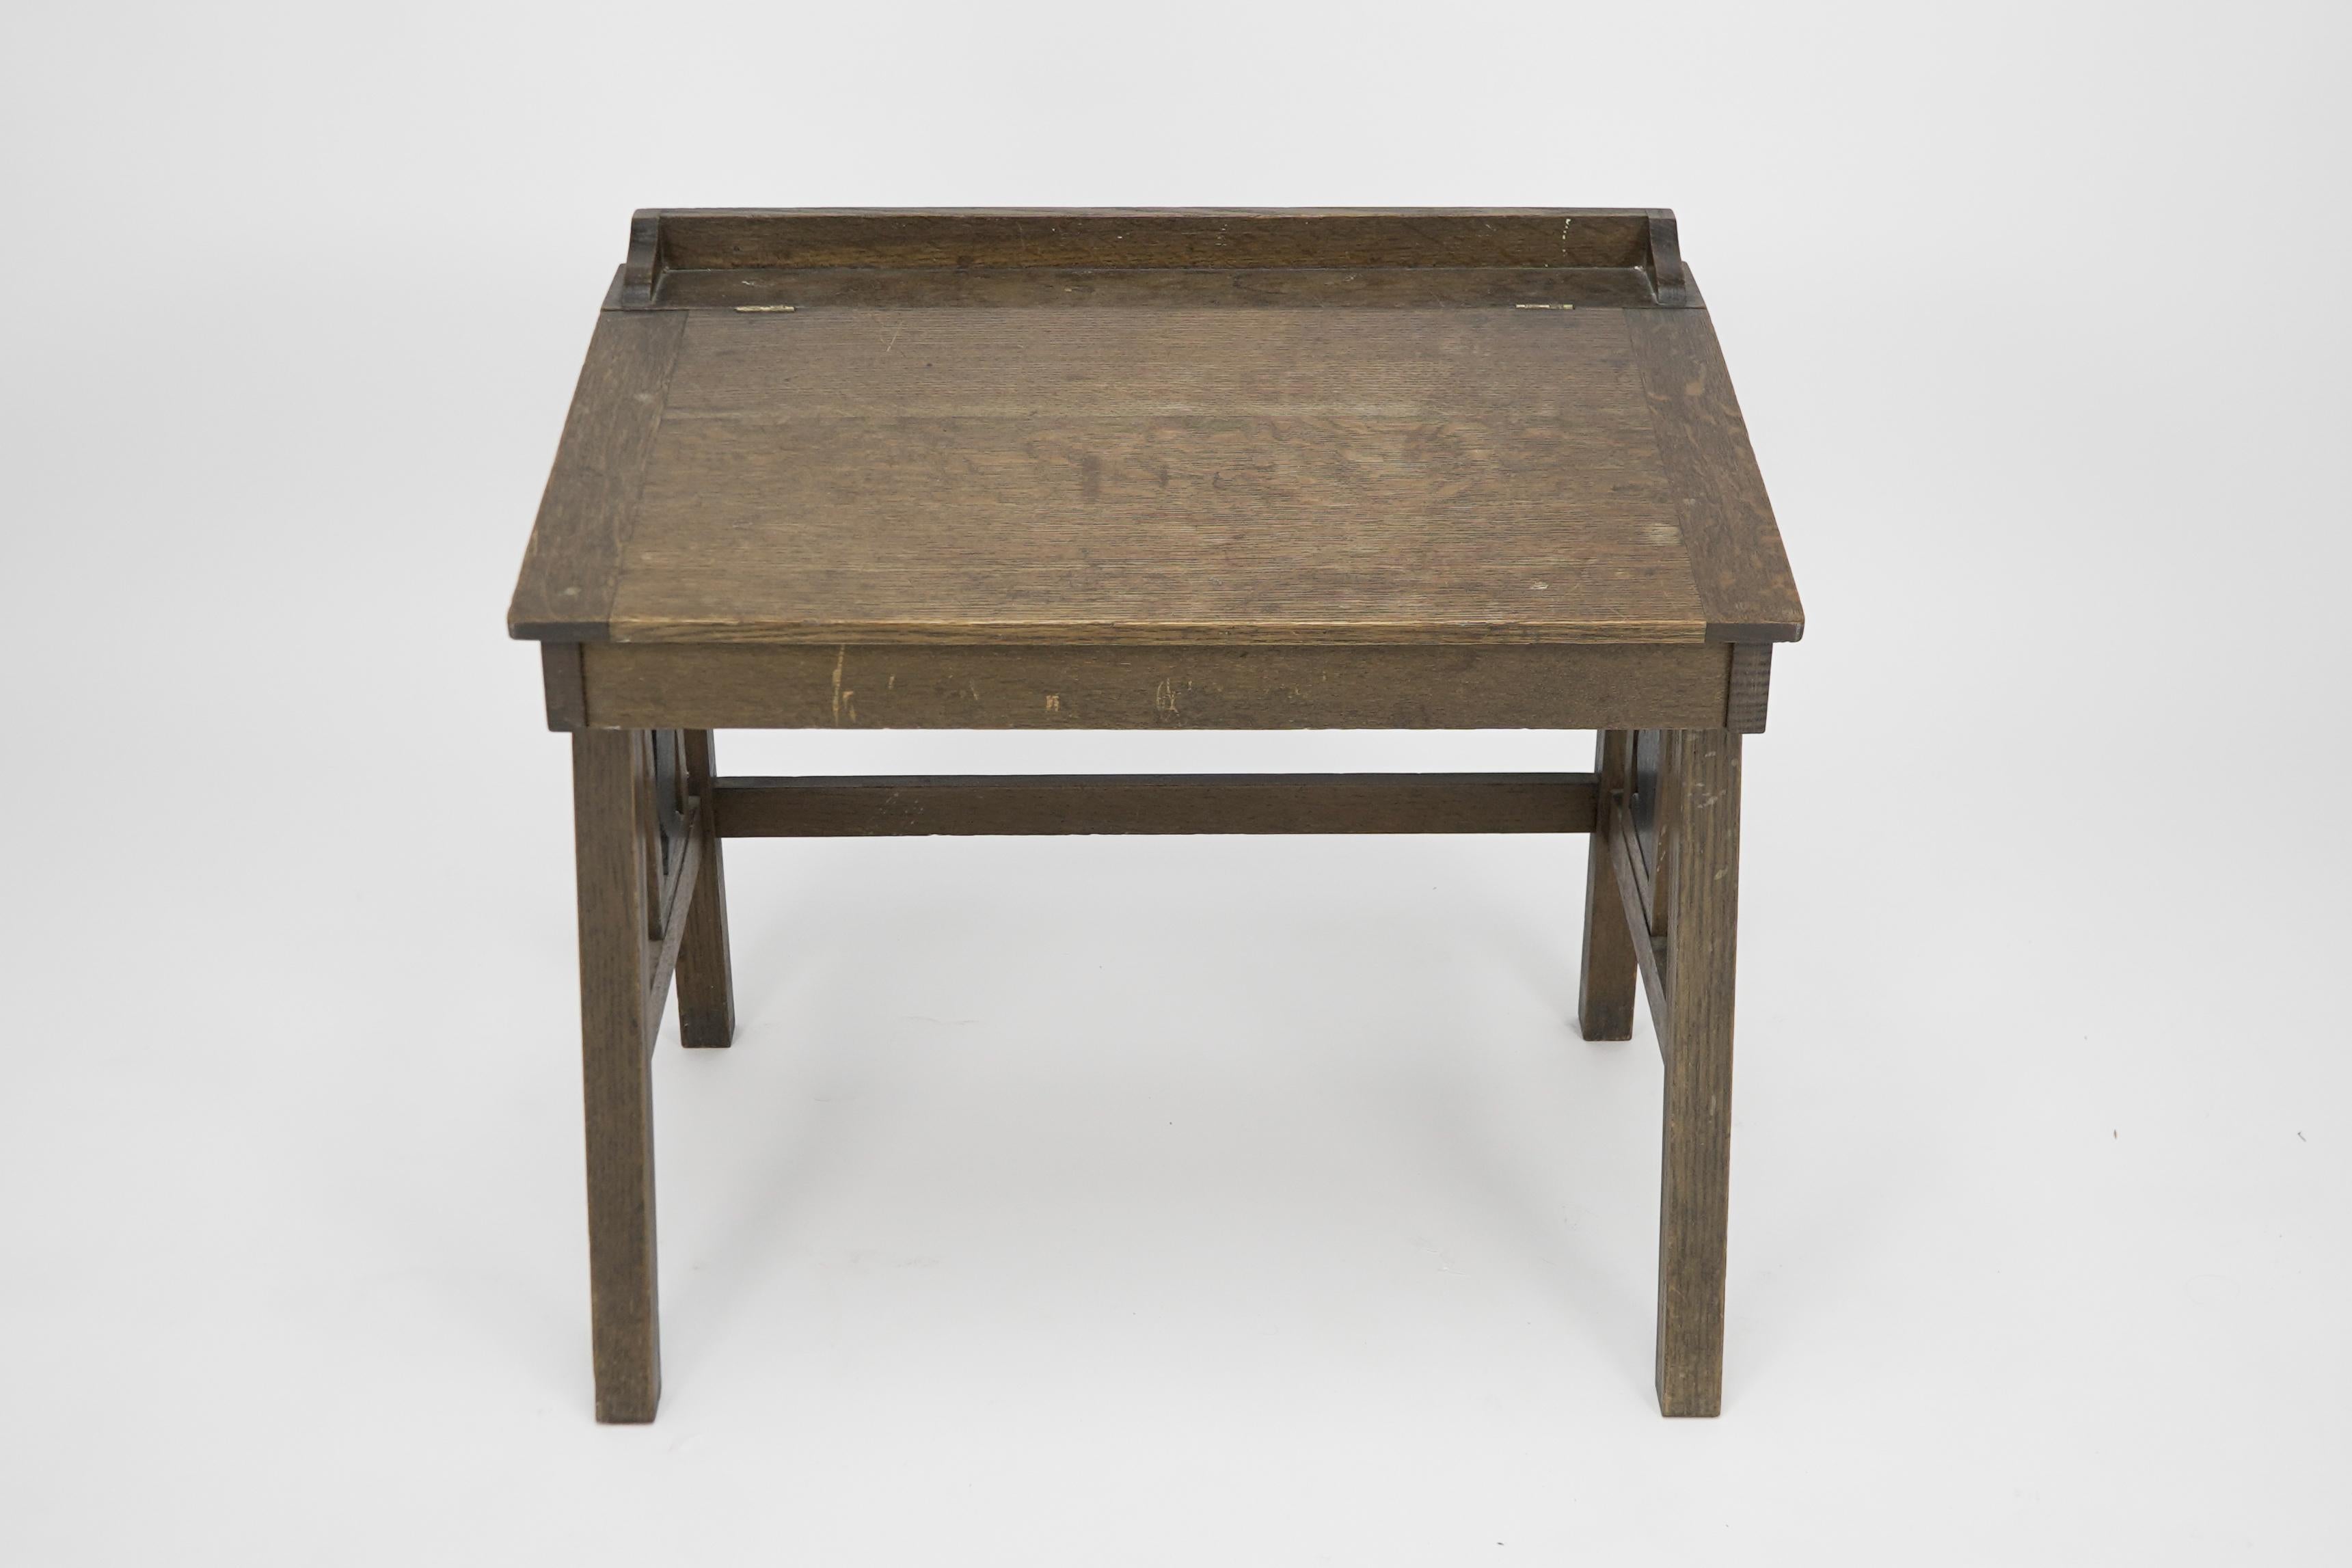 English G F Hardy. An oak childs desk with a slanted writing area and storage underneath For Sale